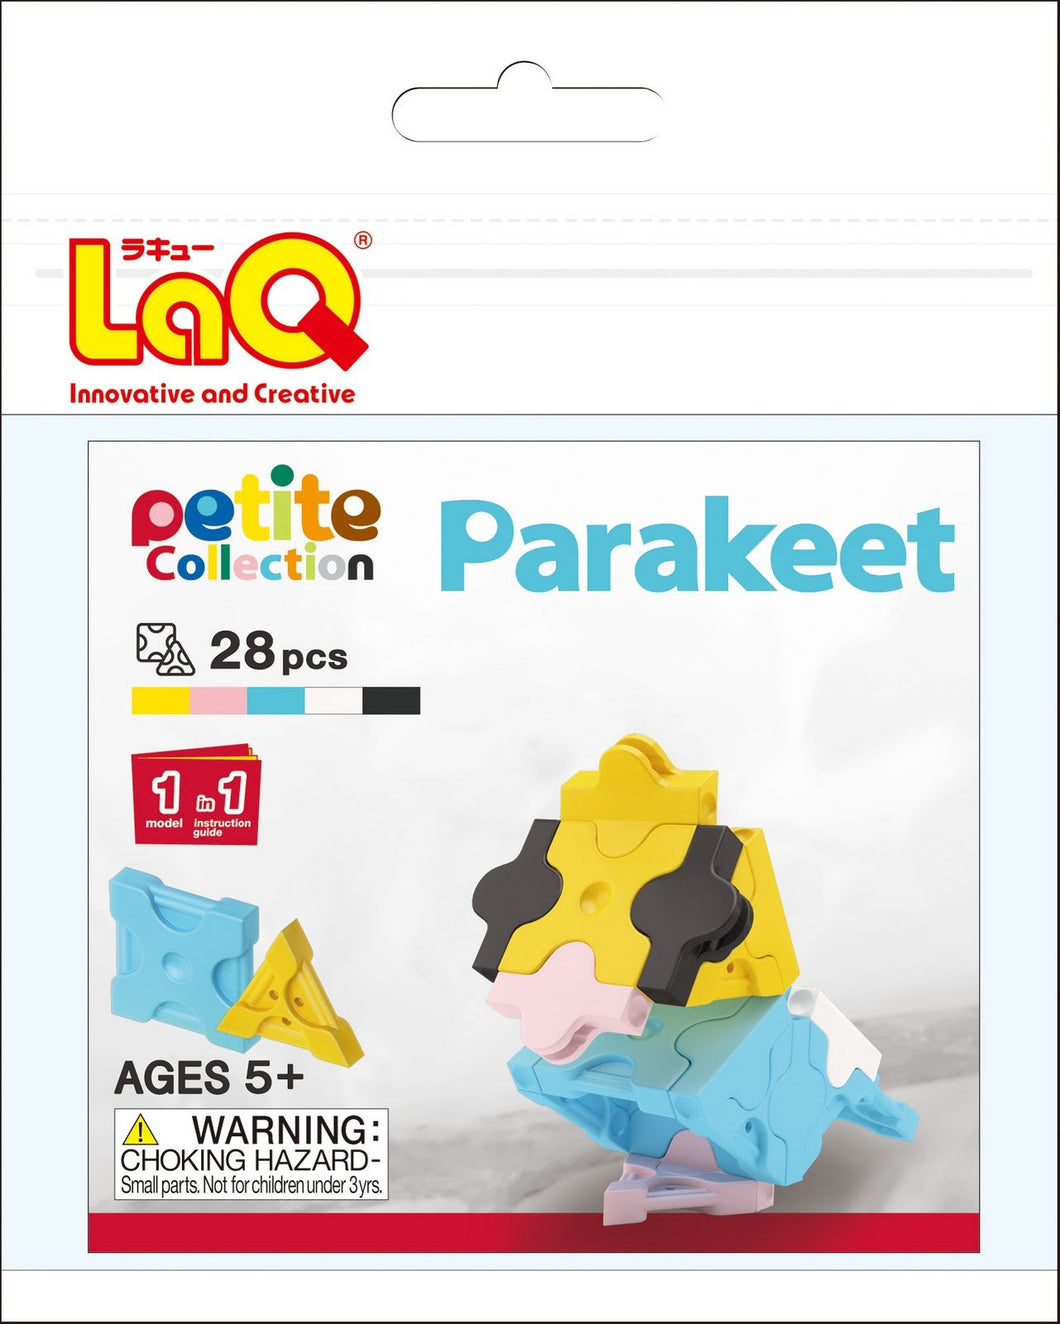 Parakeet set package featured in the LaQ petite set